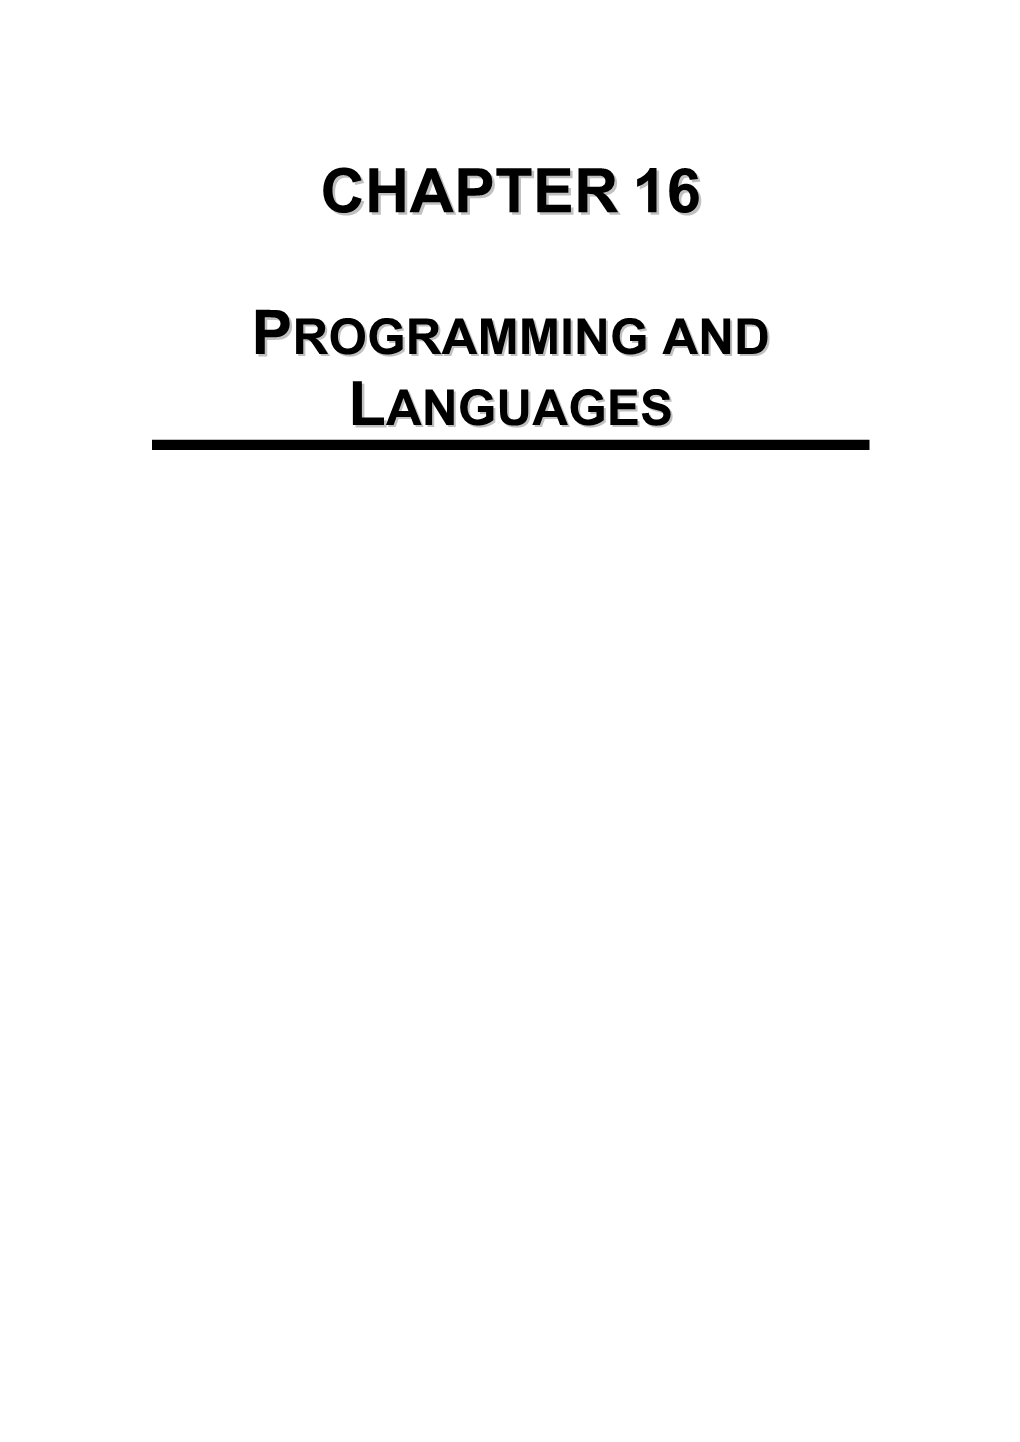 Chapter 16 Programming and Languages